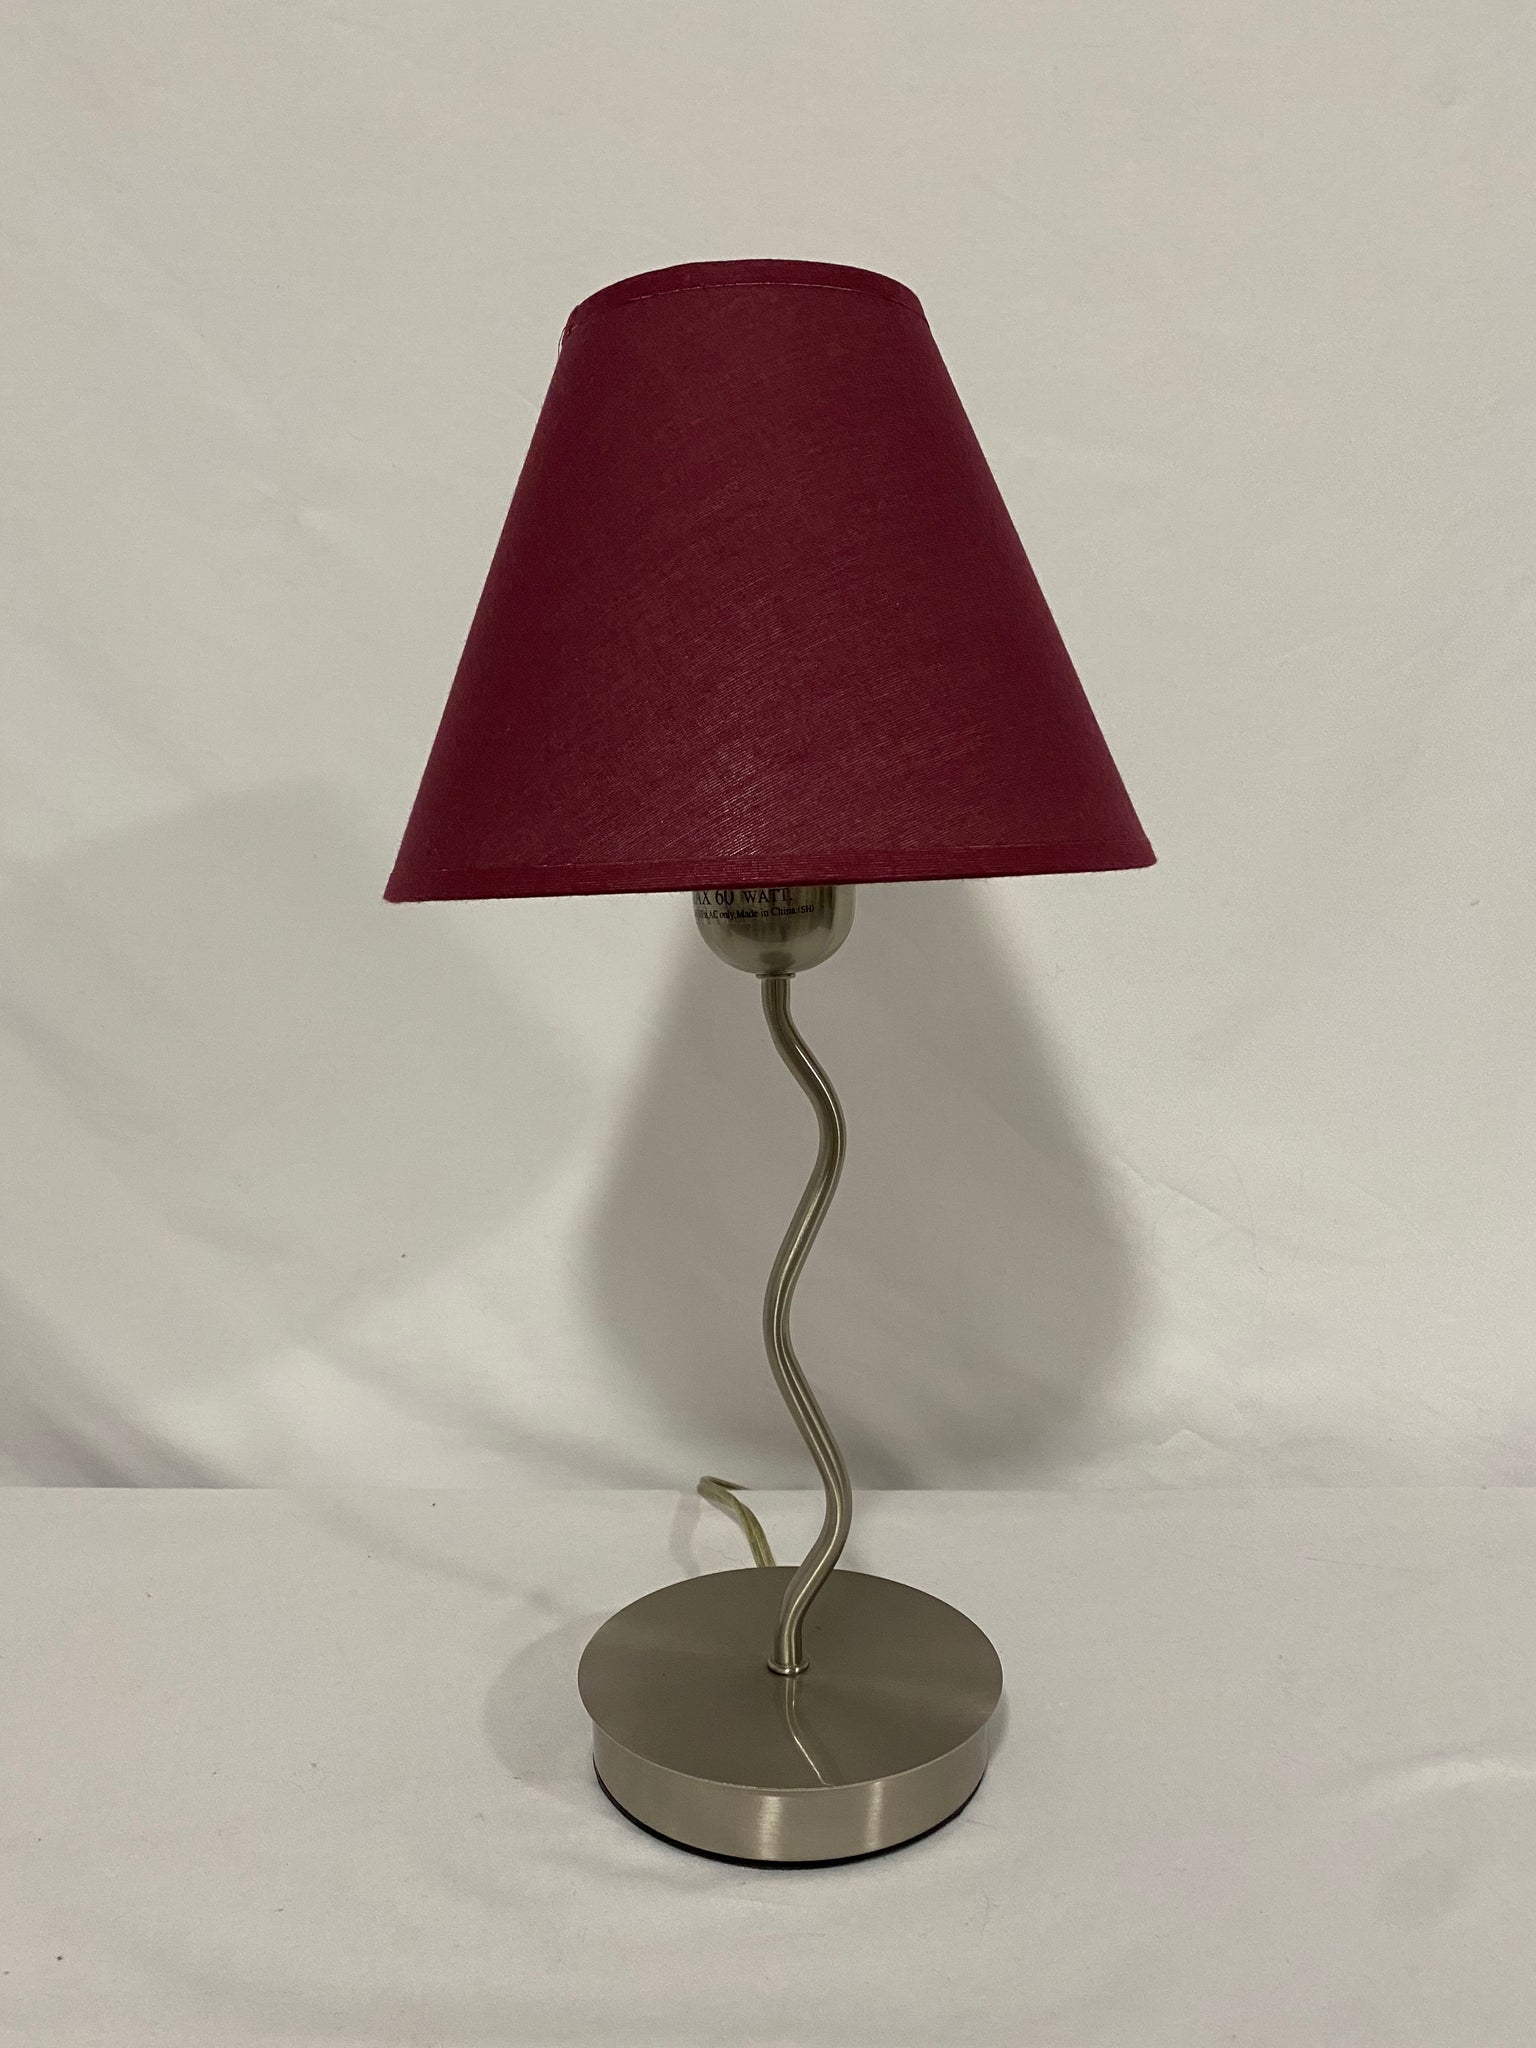 Silver squiggly lamp